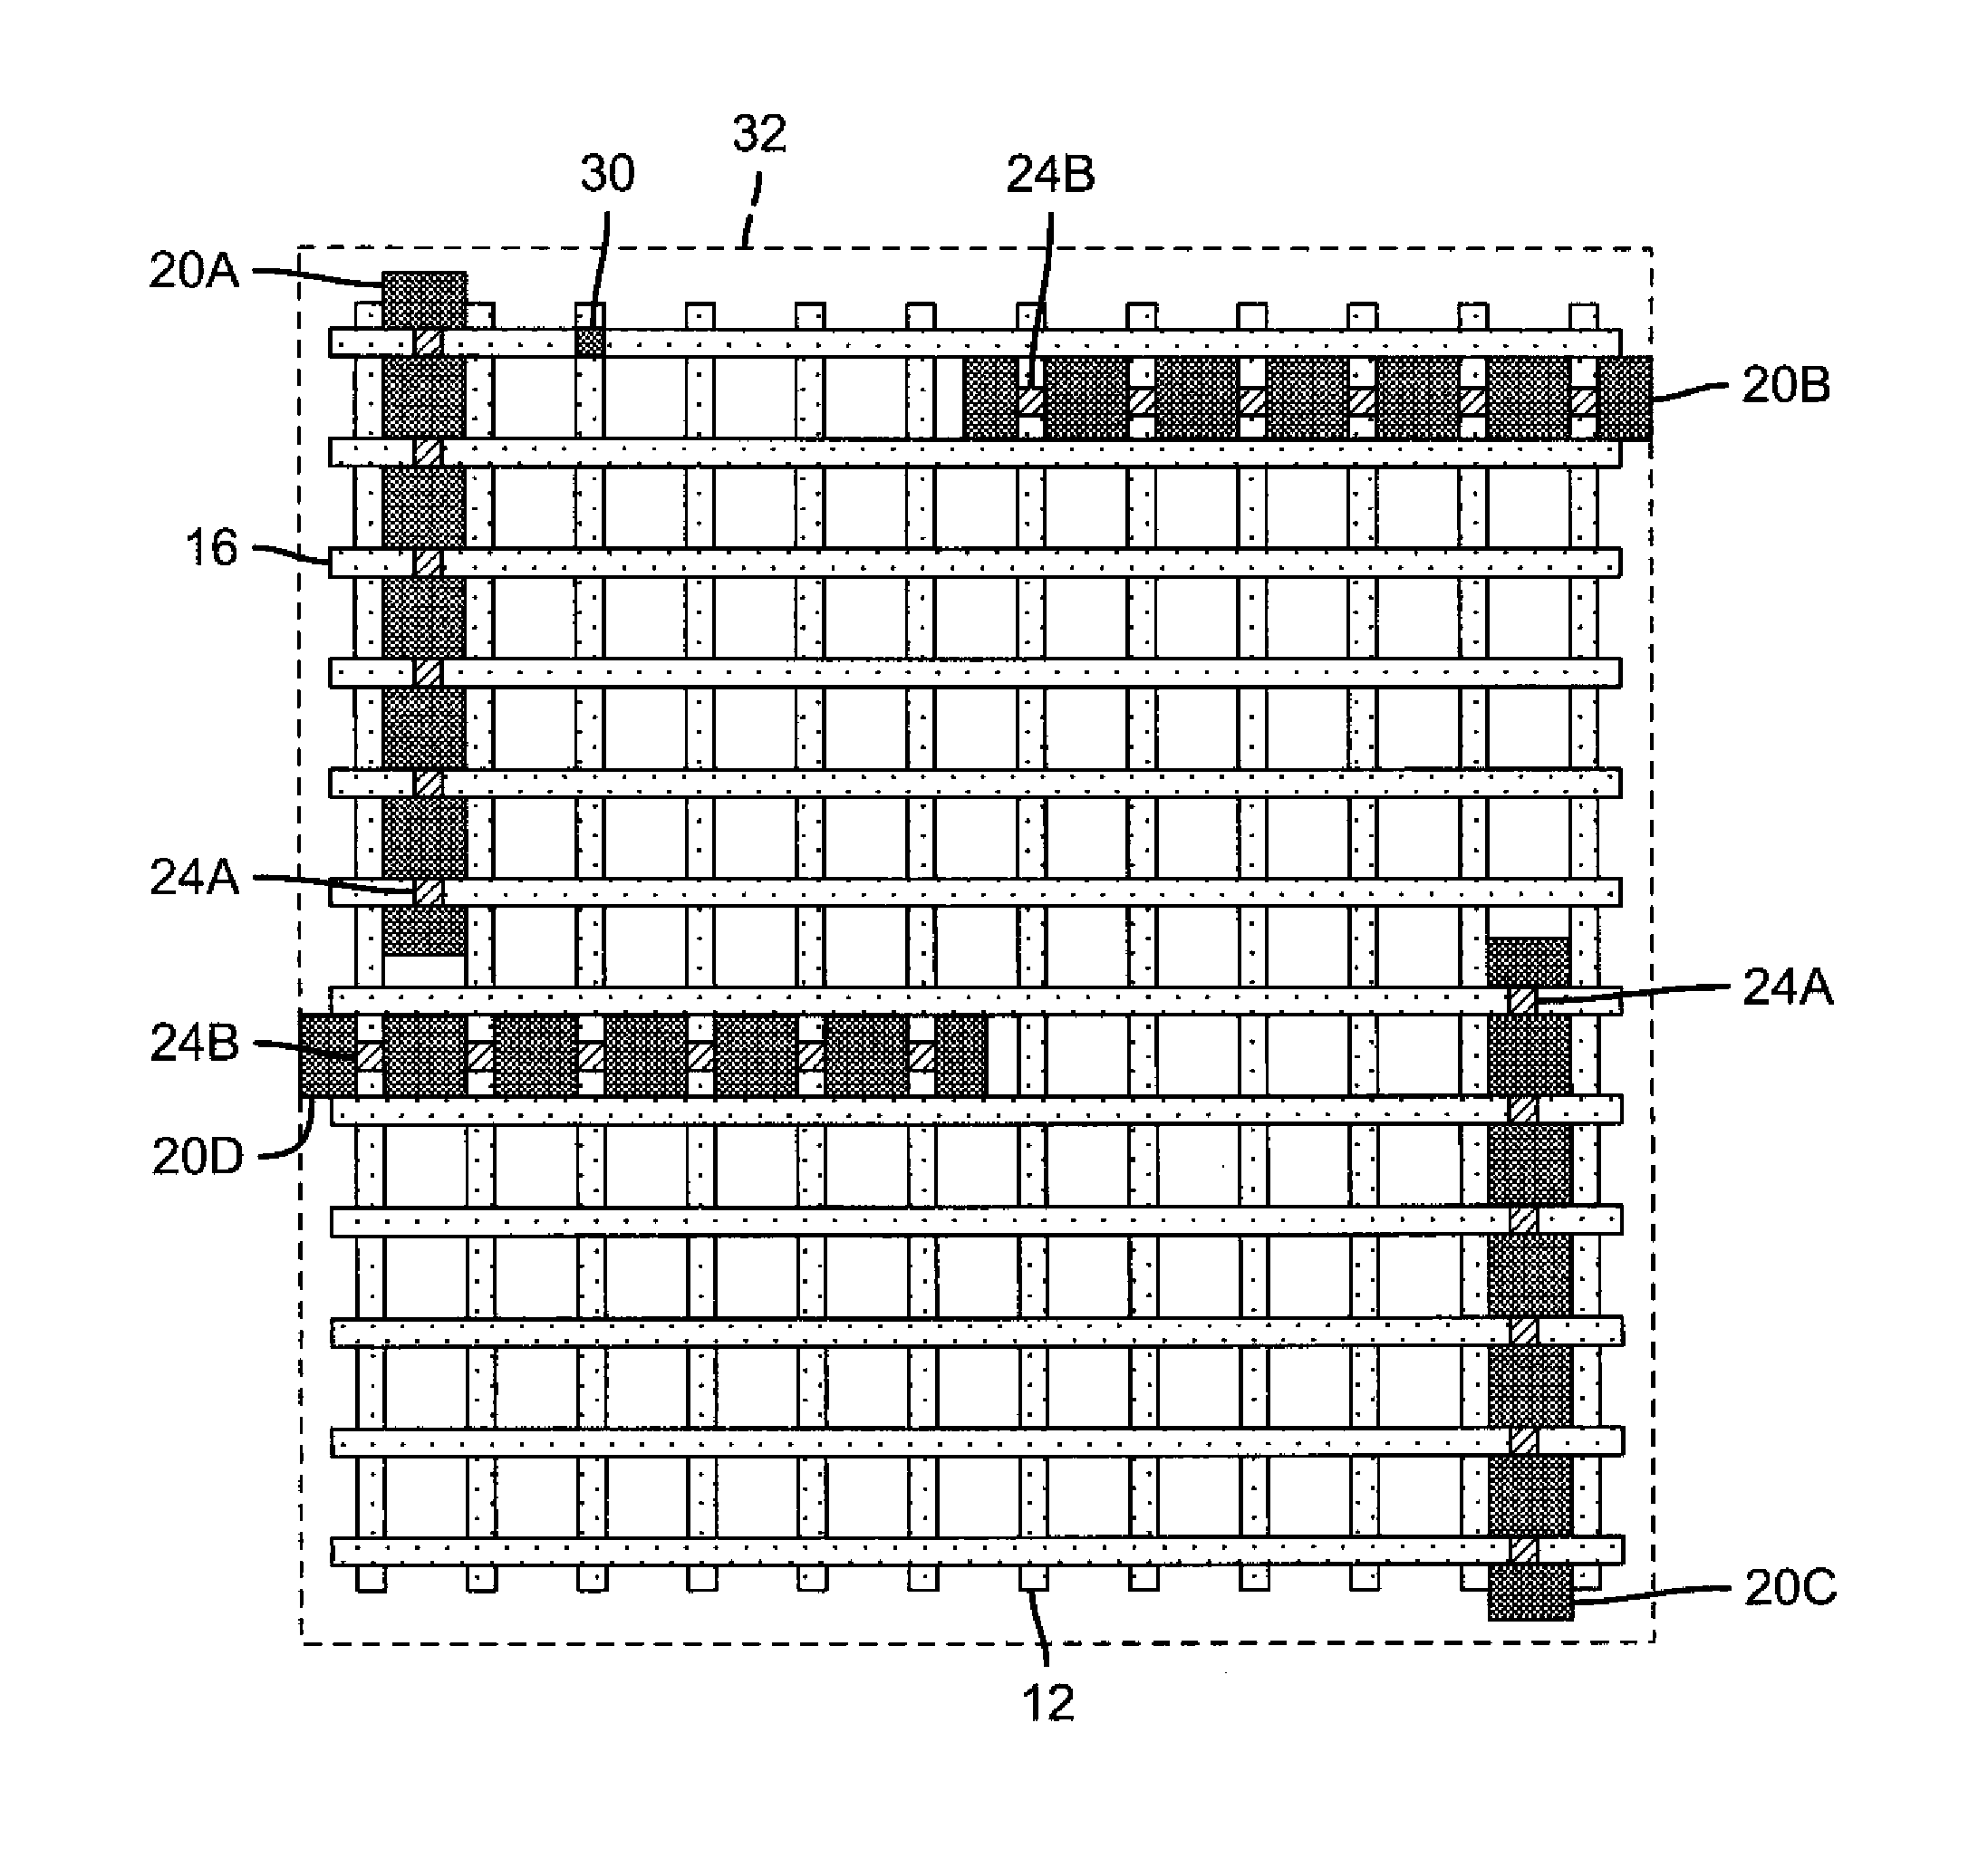 Chiplet driver pairs for two-dimensional display